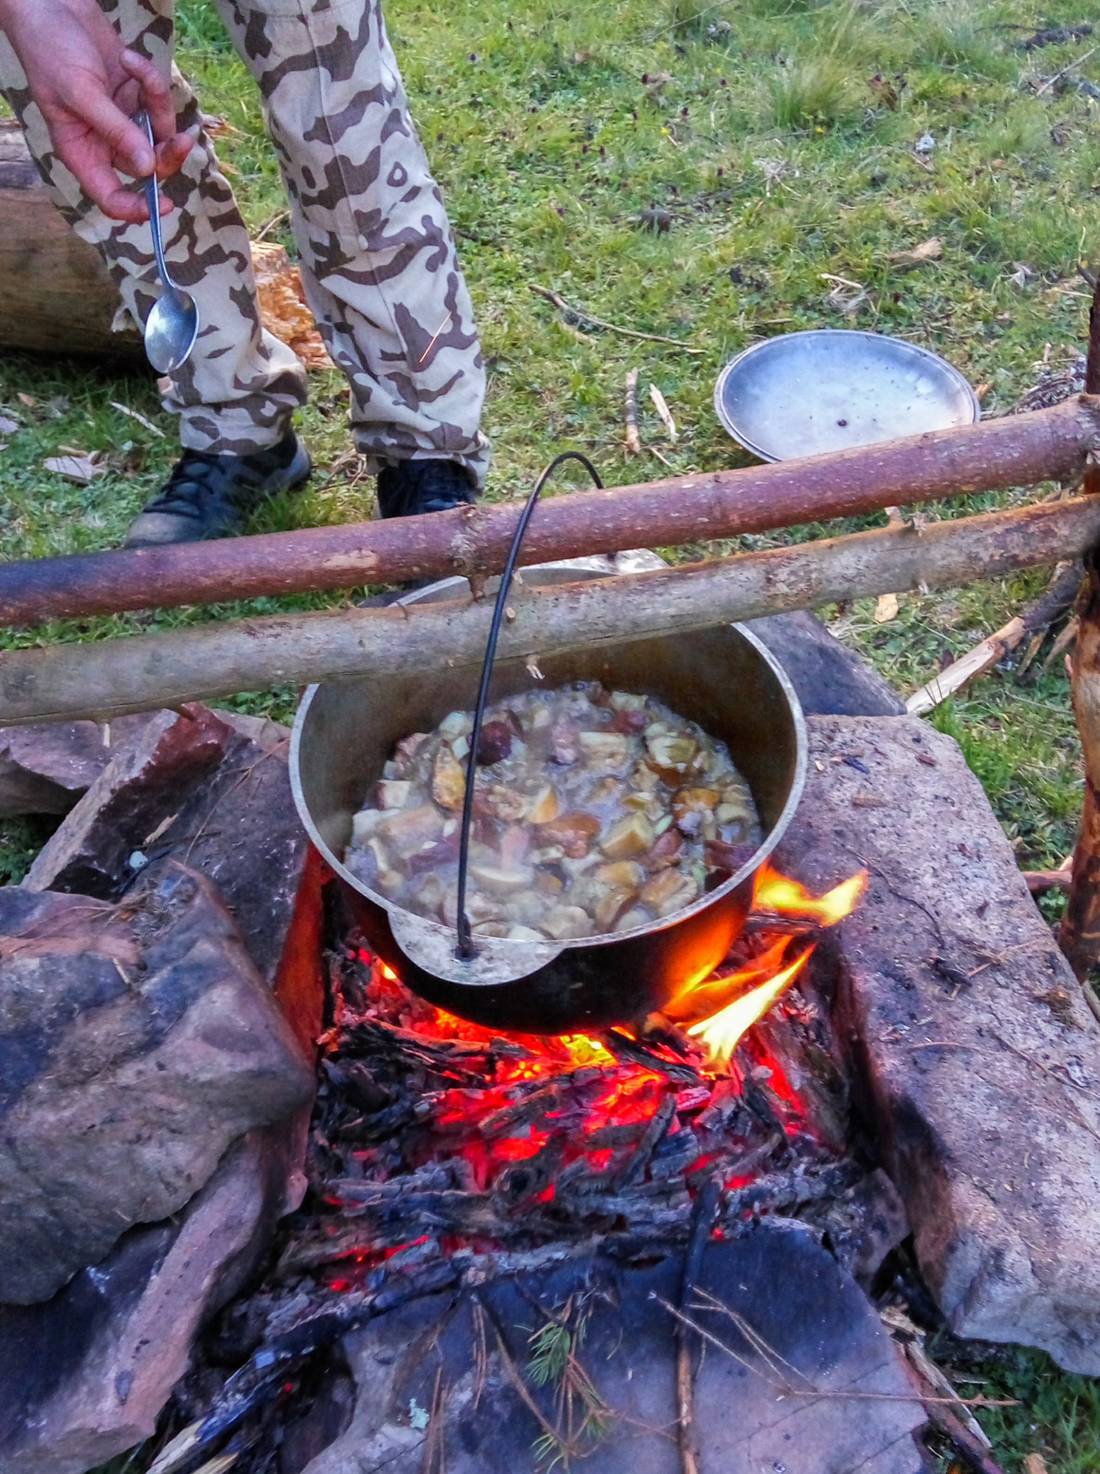 The mushrooms we picked up yesterday in the forest are stewed in a cauldron